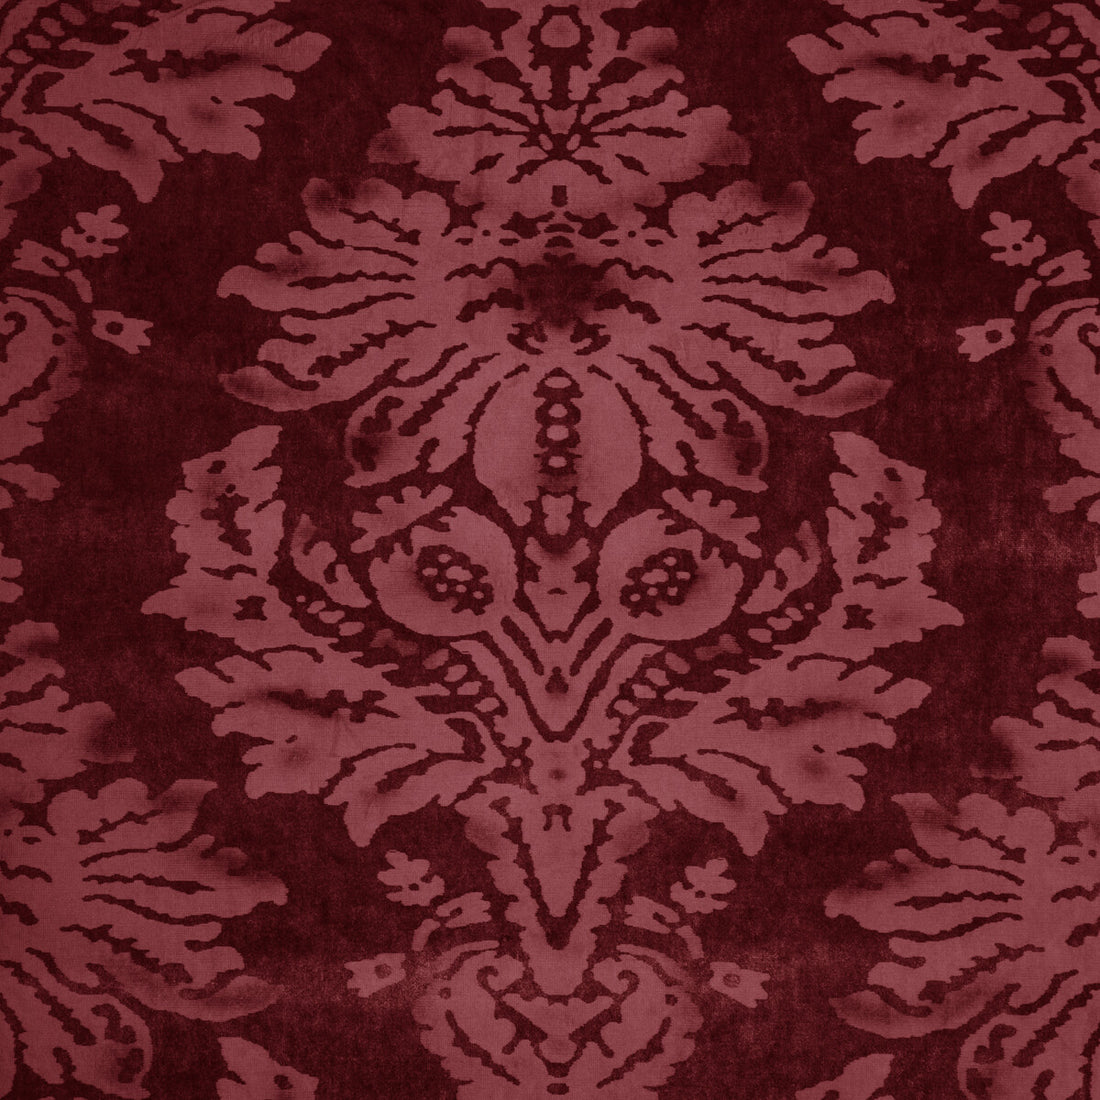 Parham Velvet fabric in ruby color - pattern 2023111.19.0 - by Lee Jofa in the Barwick Velvets collection